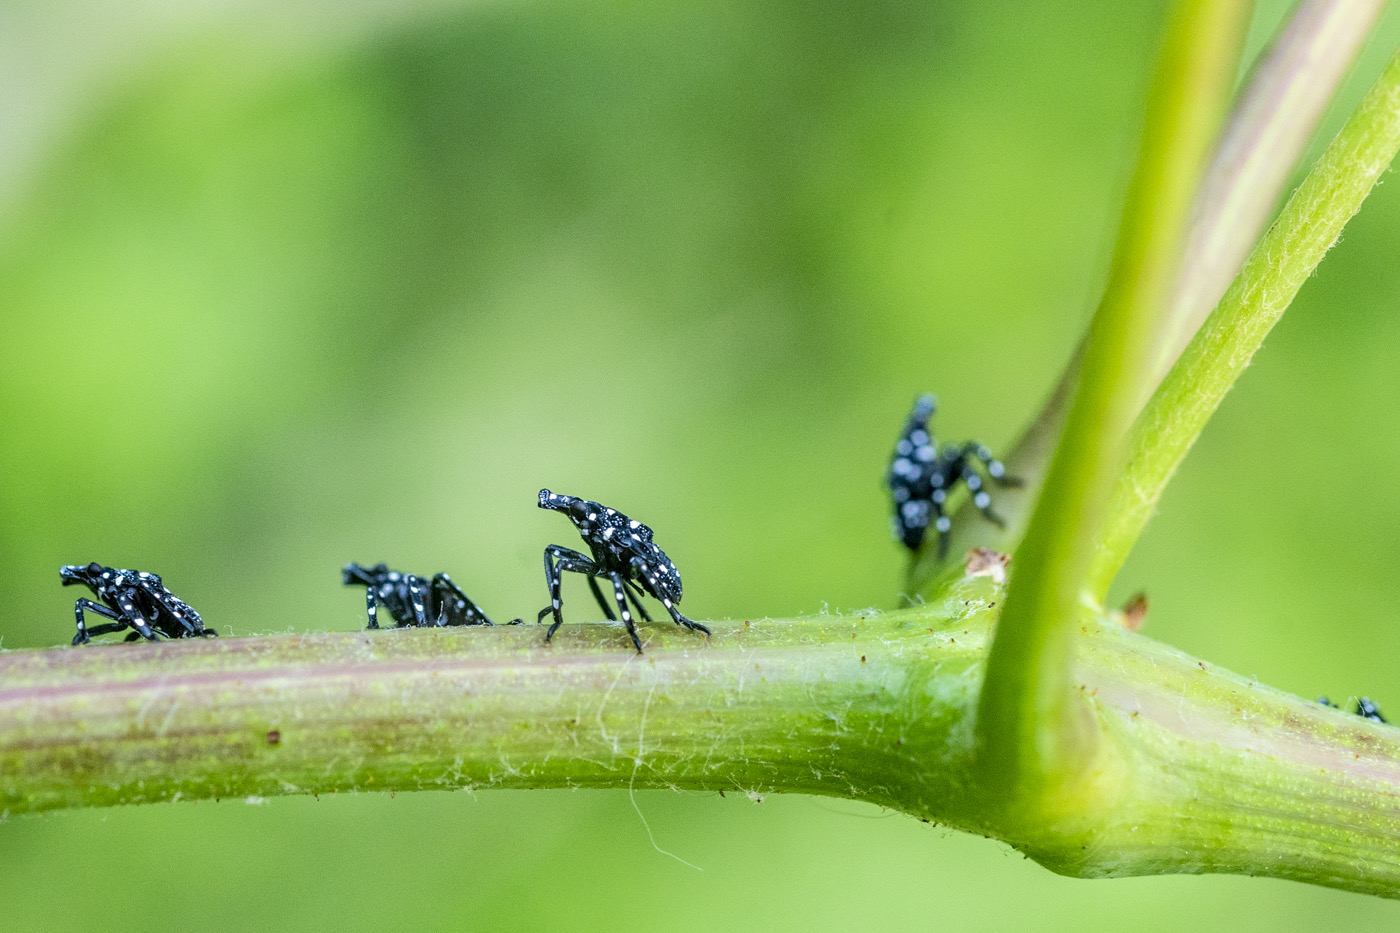 Four white-spotted black insects on a plant stem